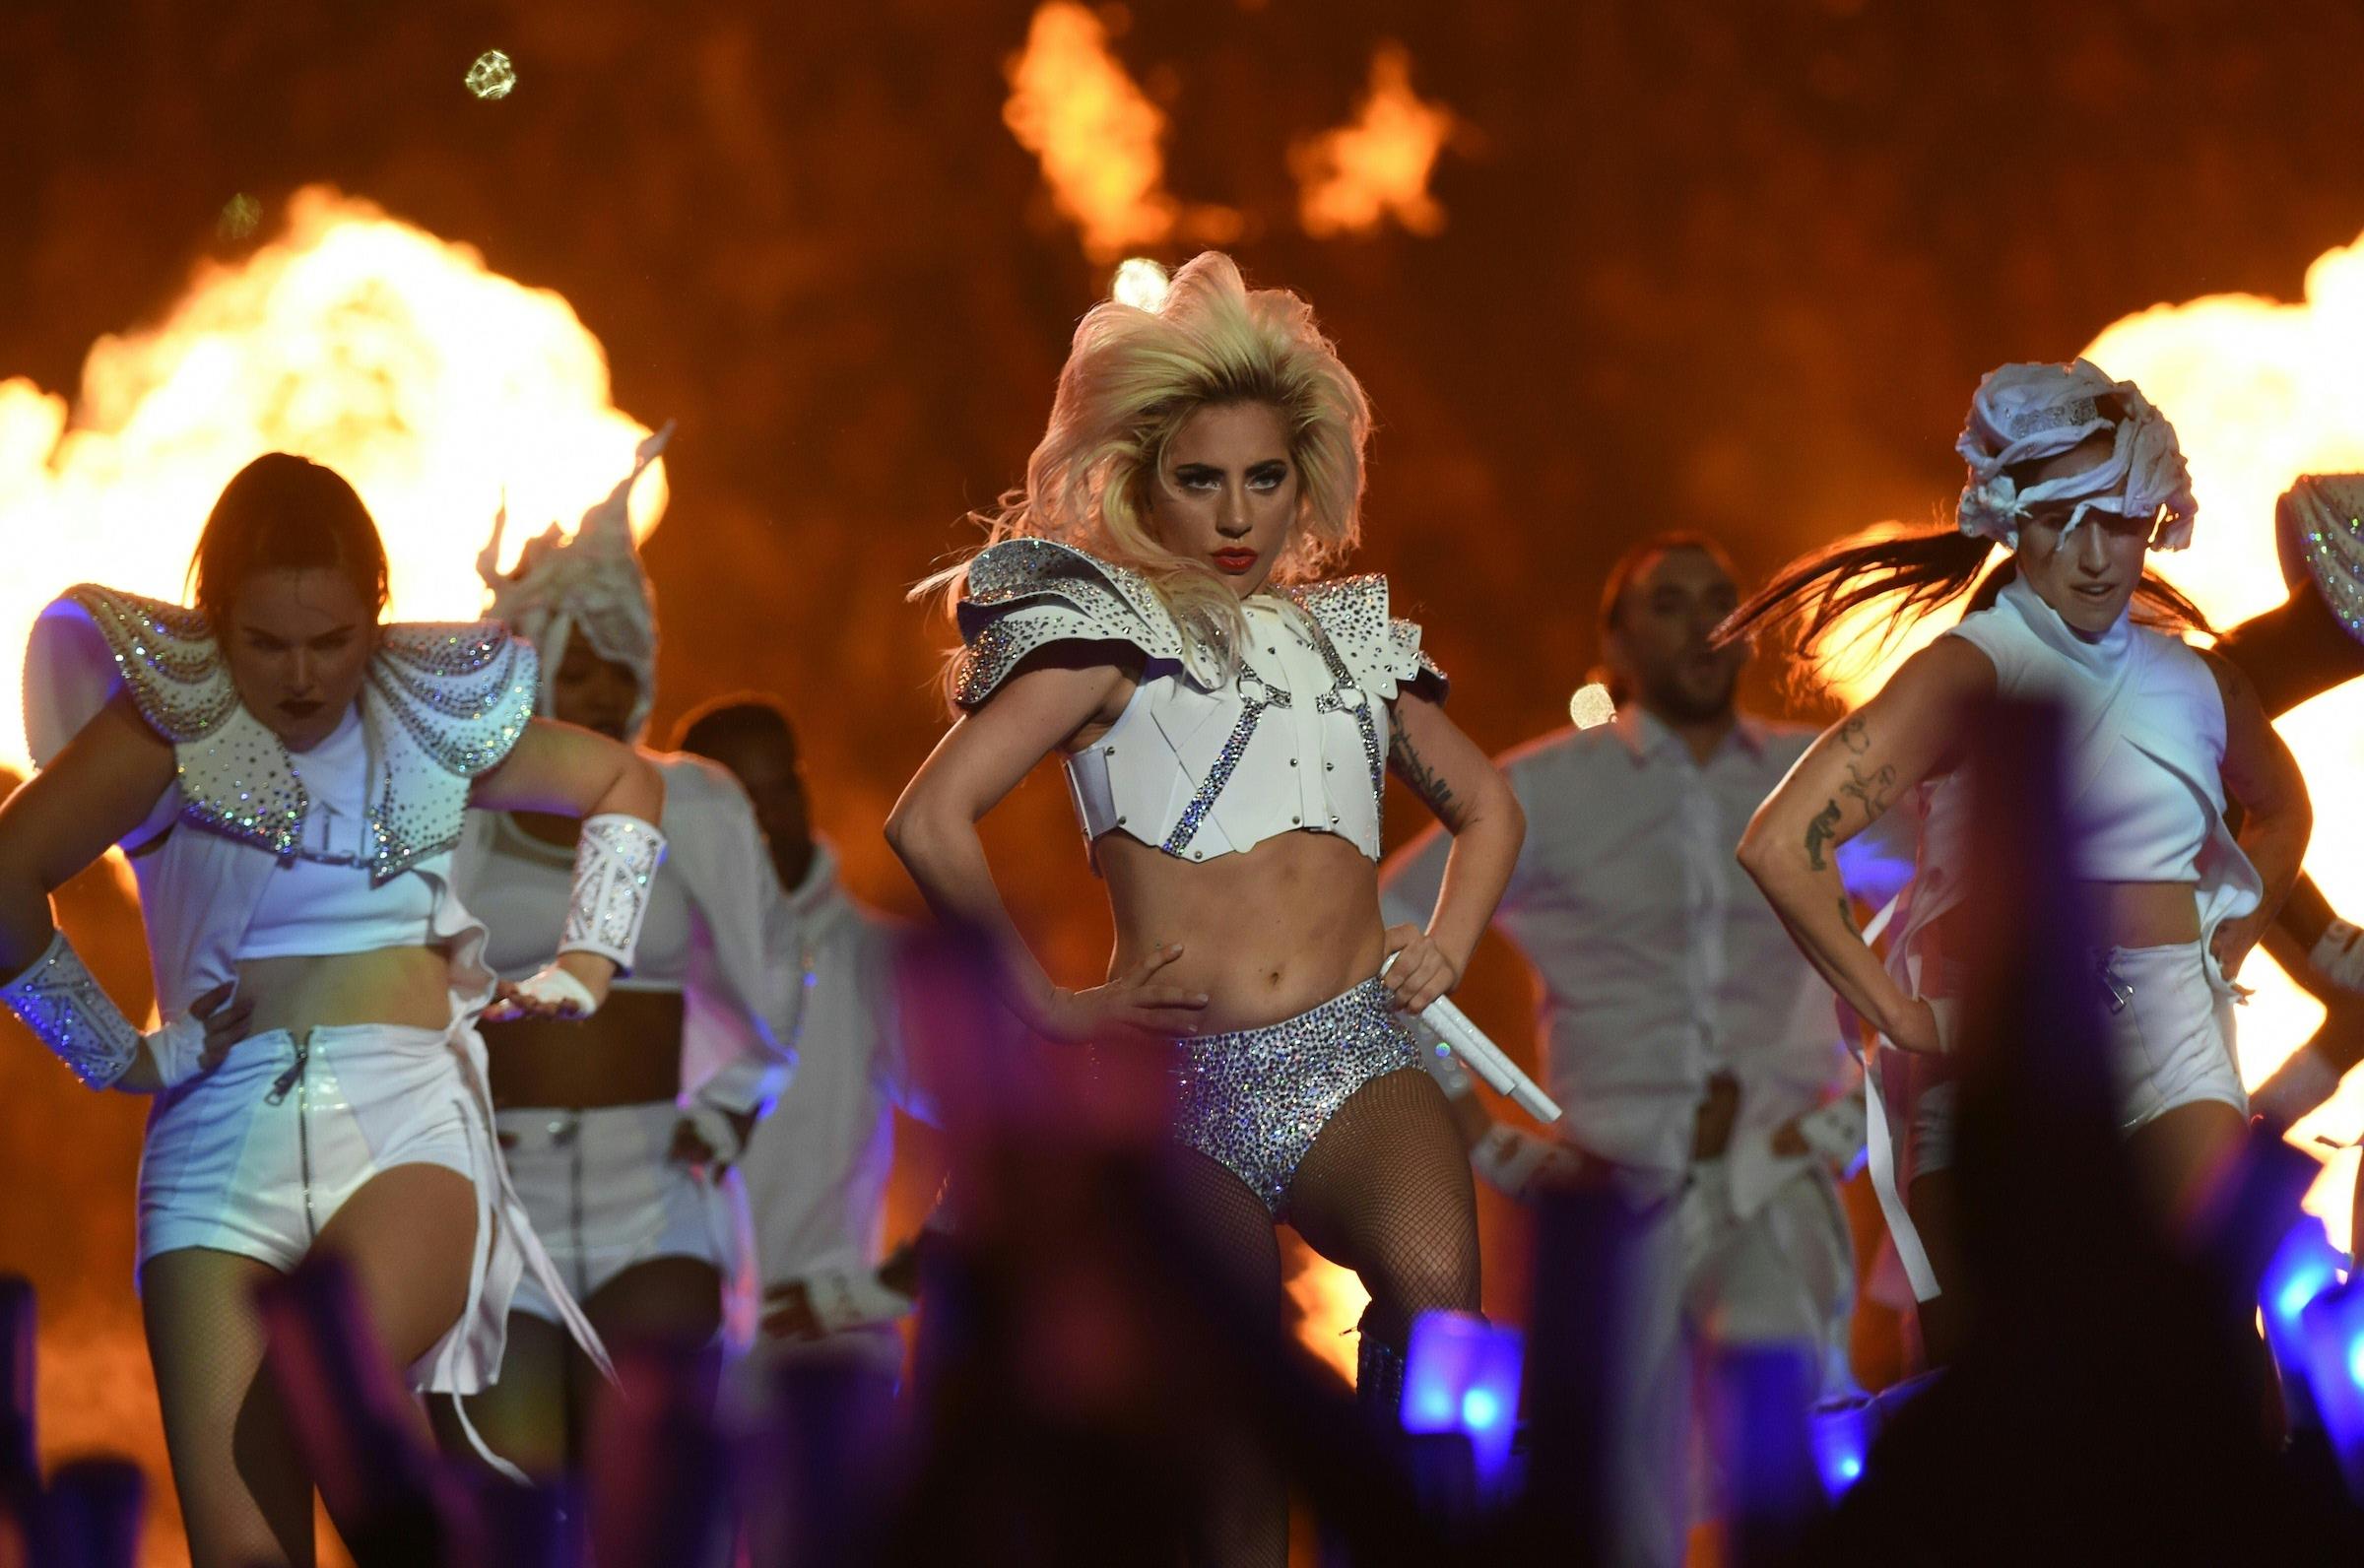 Singer Lady Gaga performs during the halftime show of Super Bowl LI at NGR Stadium in Houston, Texas